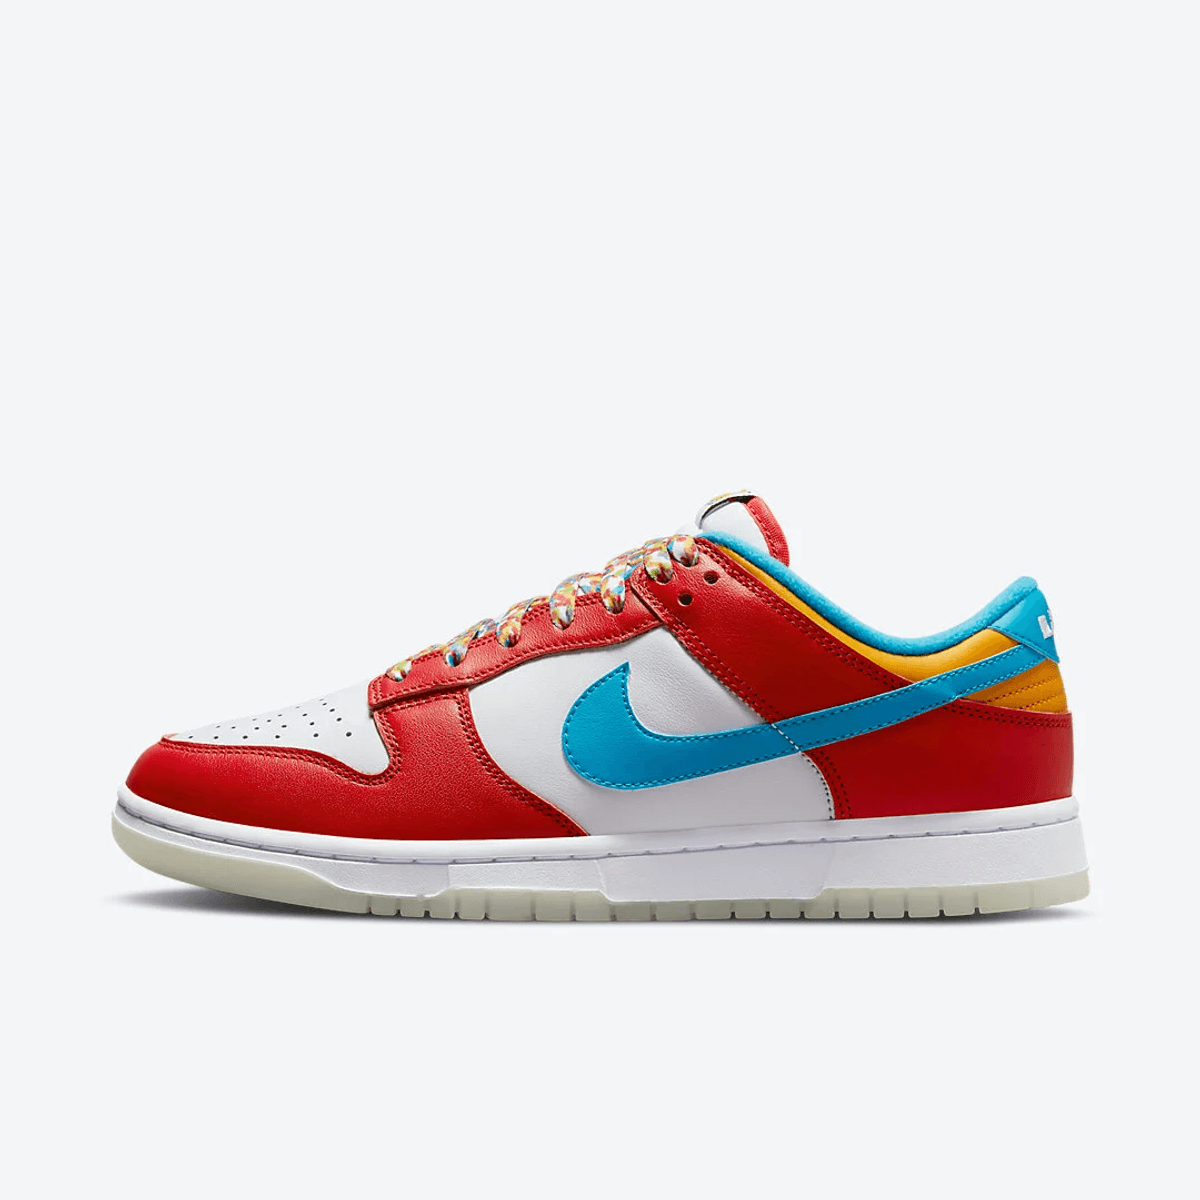 LeBron James x Nike Dunk Low Fruity Pebbles Has Been Officially Confirmed